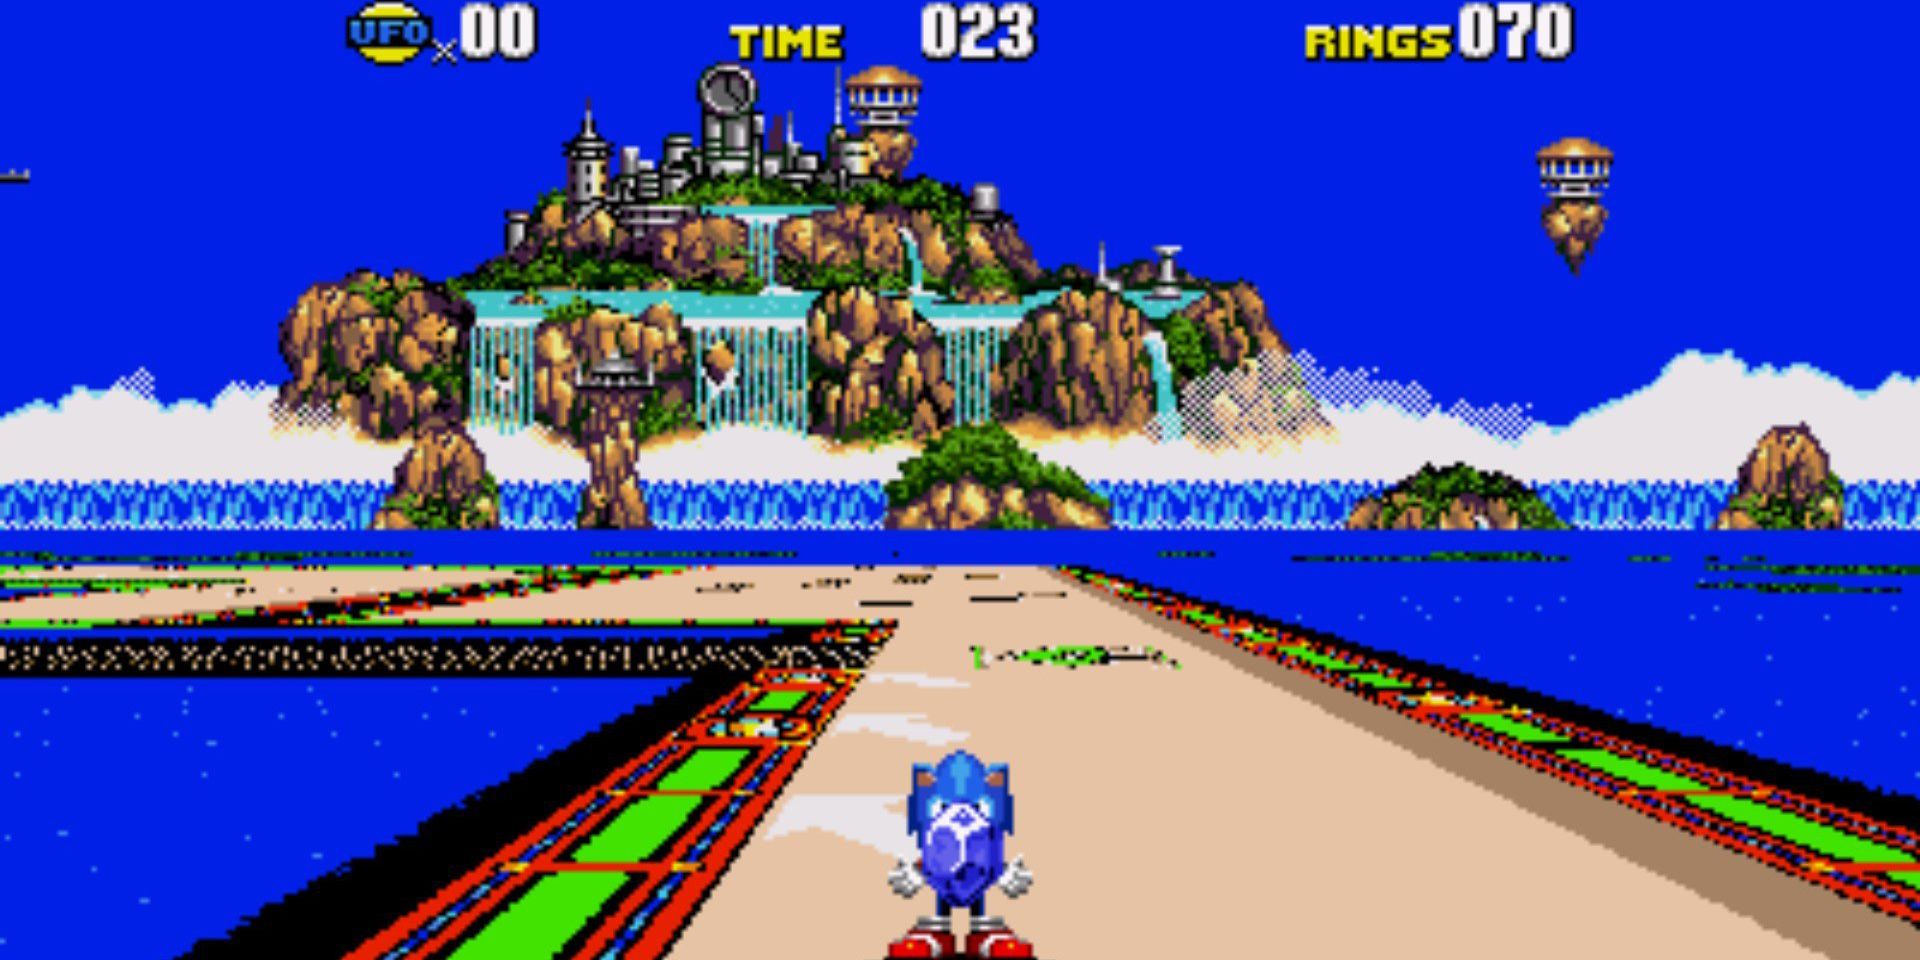 Sonic gets a Time Stone in one of the special stages.